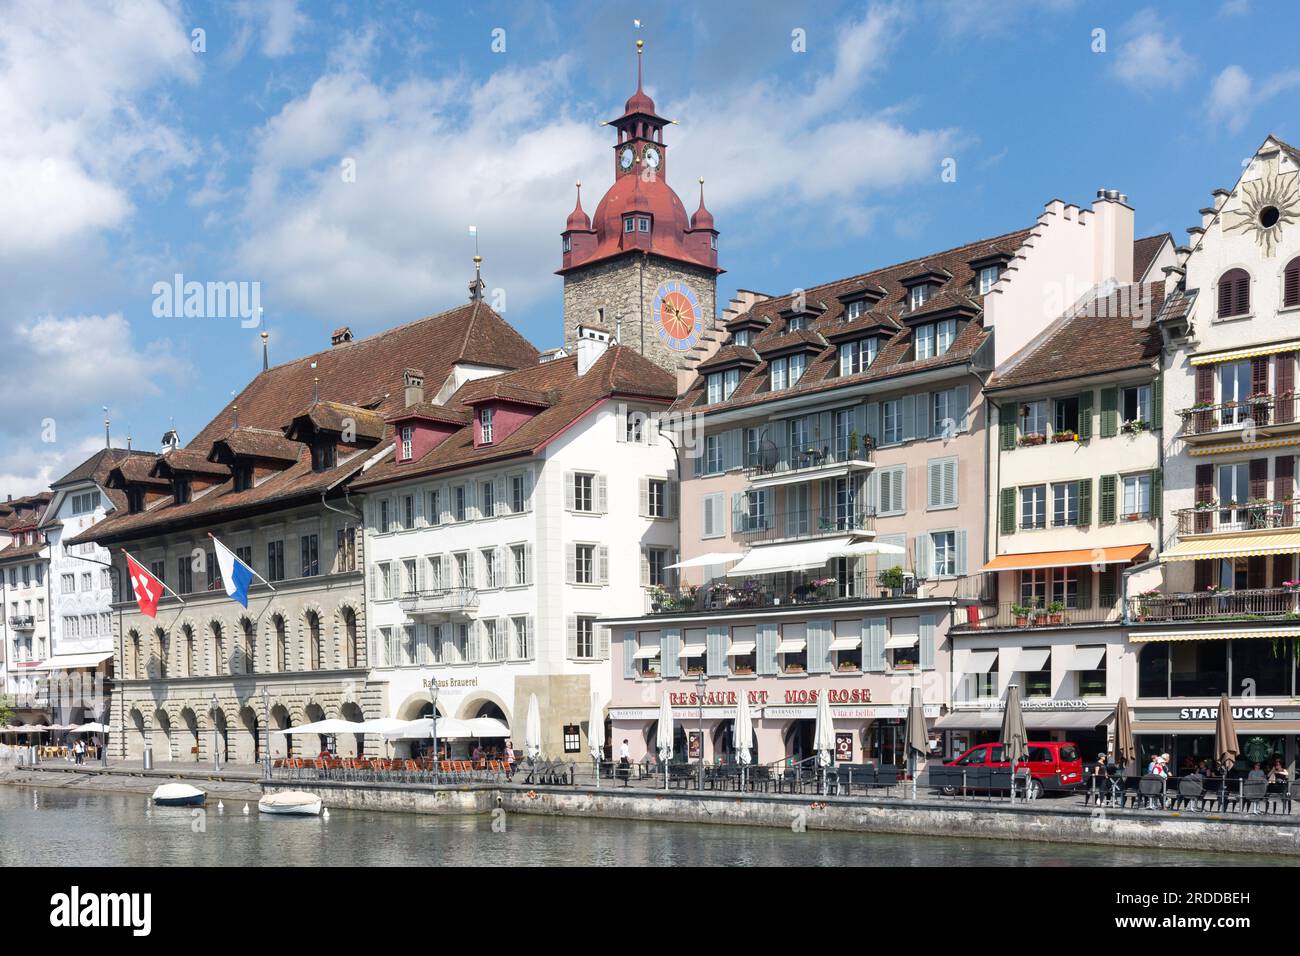 Town Hall Clock Tower and riverside buildings from The Kapellbrücke (Chapel Bridge), City of Lucerne (Luzern), Lucerne, Switzerland Stock Photo